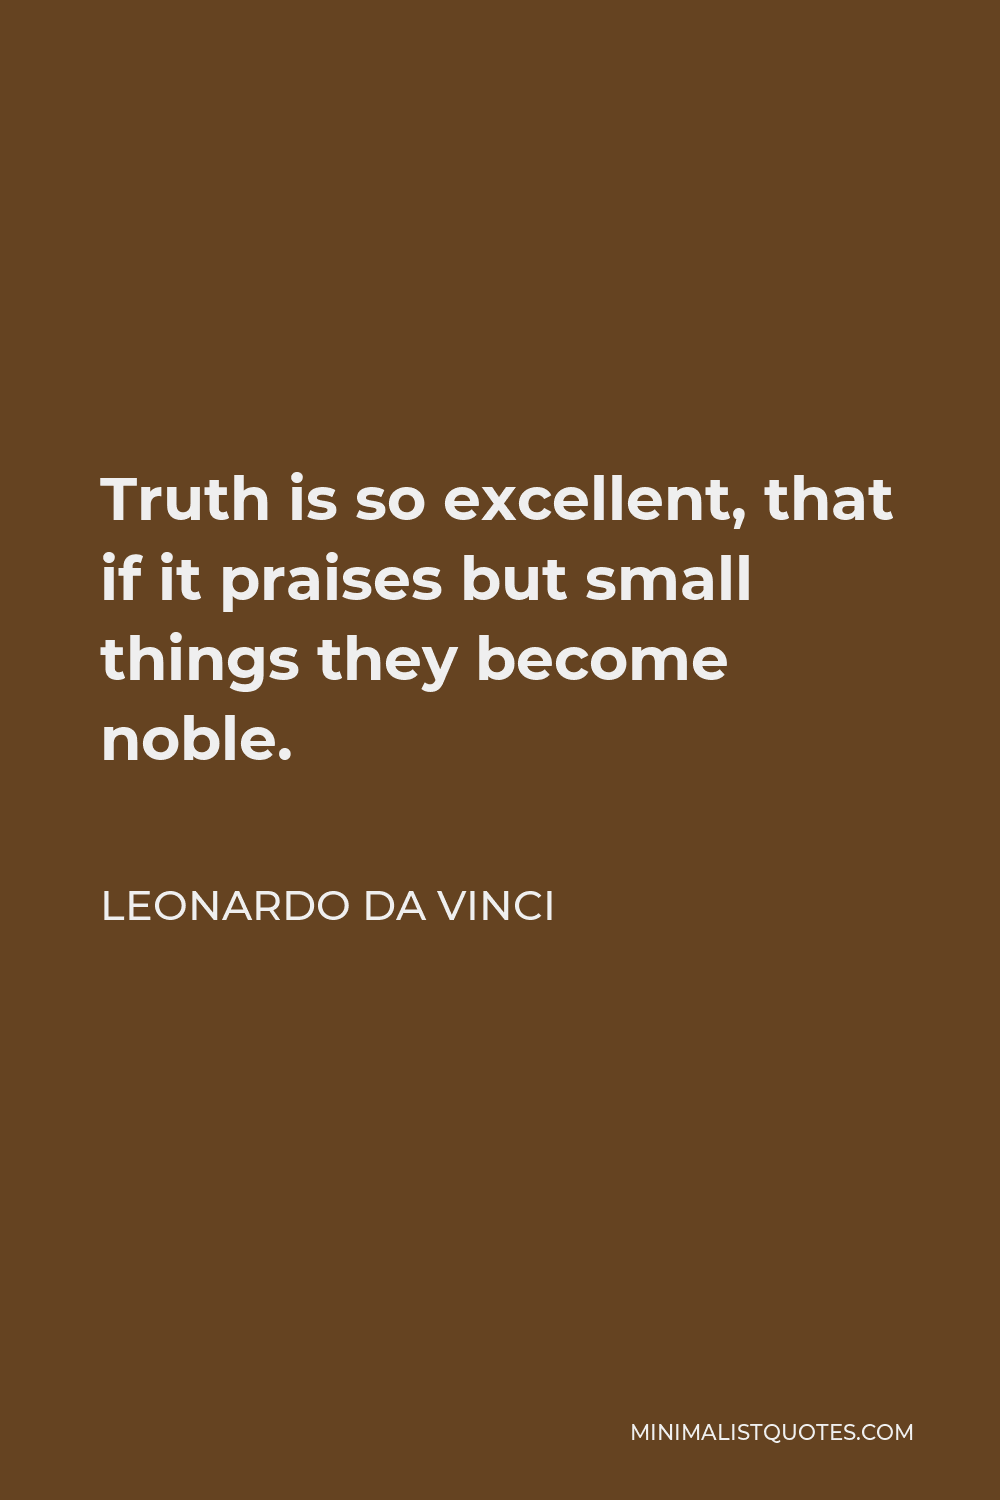 Leonardo da Vinci Quote - Truth is so excellent, that if it praises but small things they become noble.